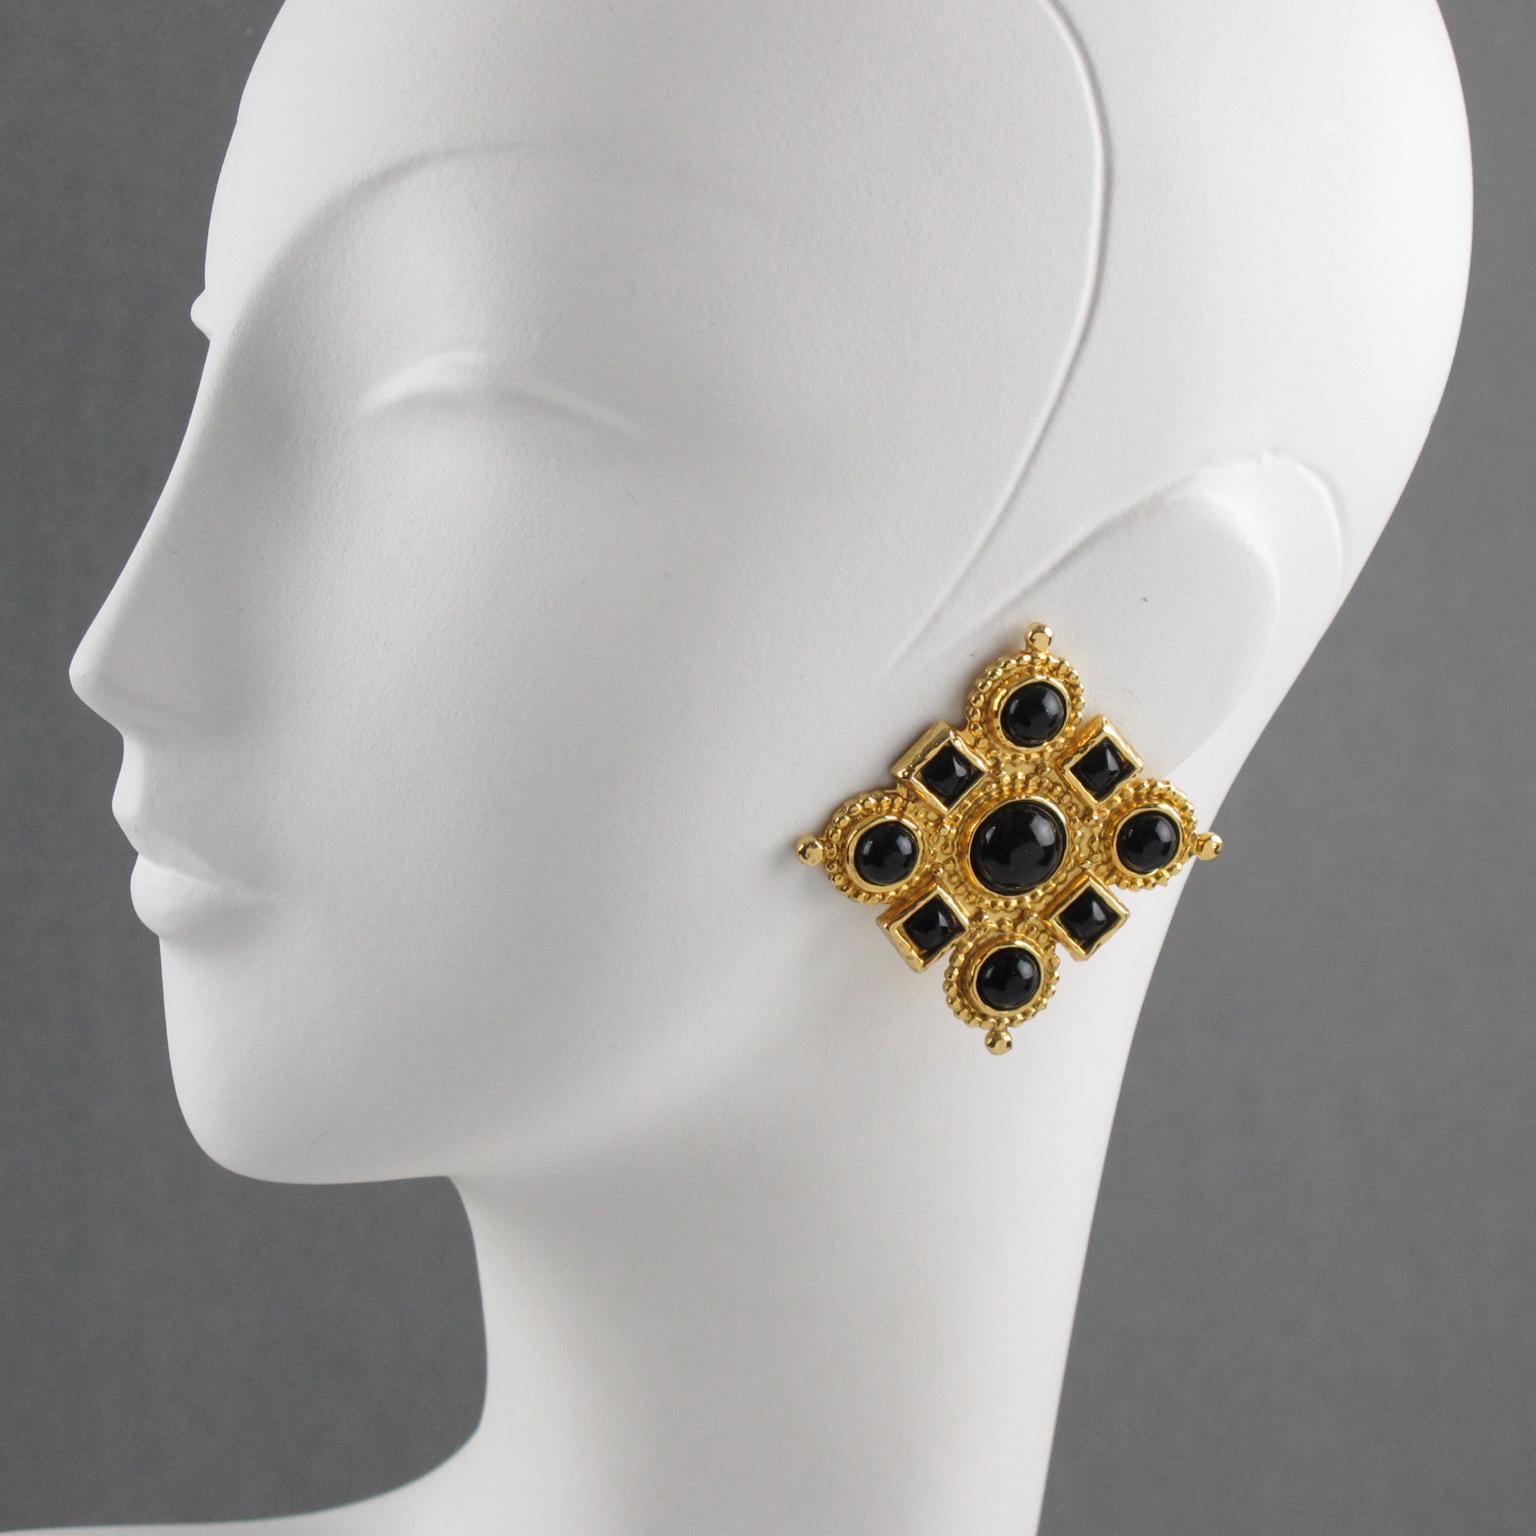 Stunning oversized Edouard Rambaud Paris signed clip-on earrings. Byzantine revival inspired design with a gilt metal square shape all textured topped with resin and glass cabochons in true licorice black color. Signed underside: 